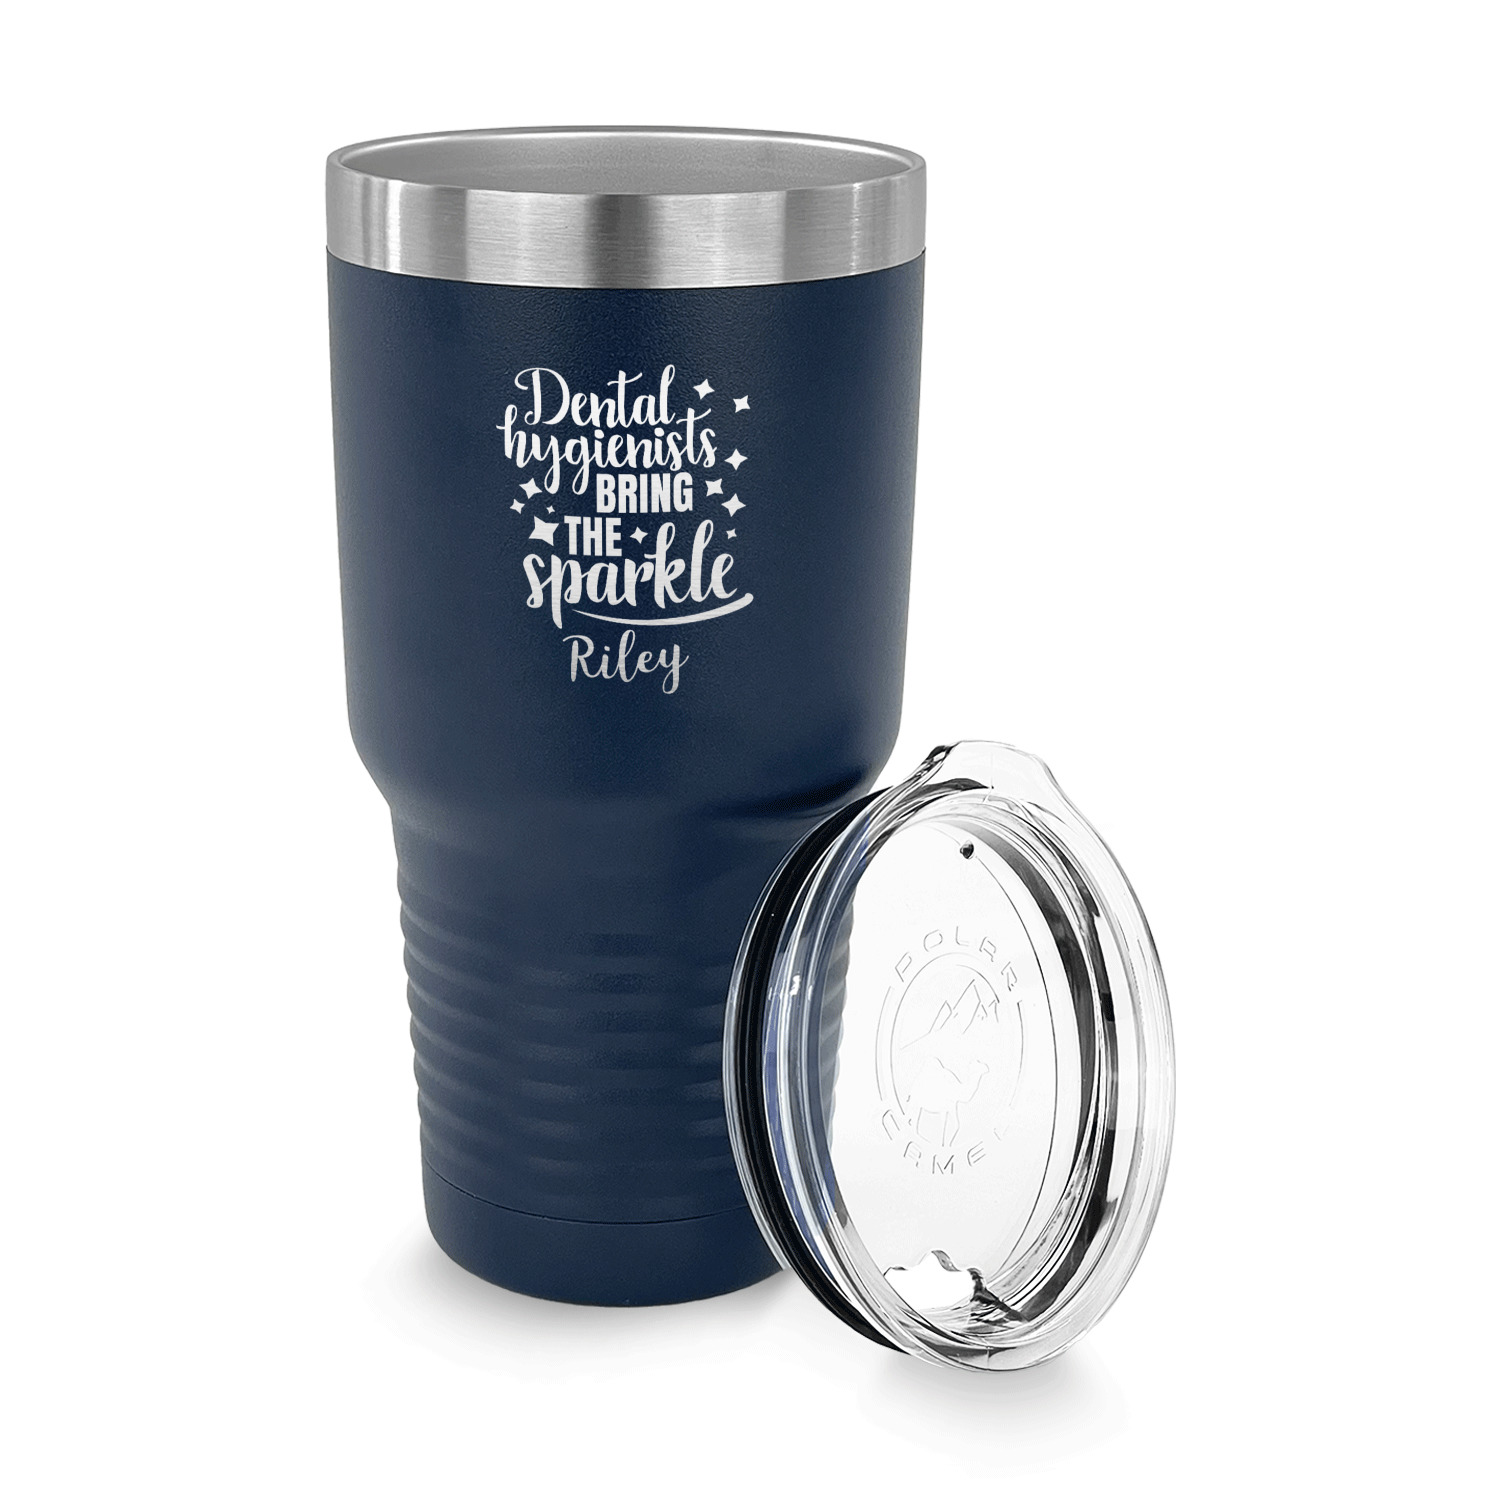 https://www.youcustomizeit.com/common/MAKE/2663497/Dental-Hygienist-30-oz-Stainless-Steel-Ringneck-Tumblers-Navy-LID-OFF.jpg?lm=1688680355